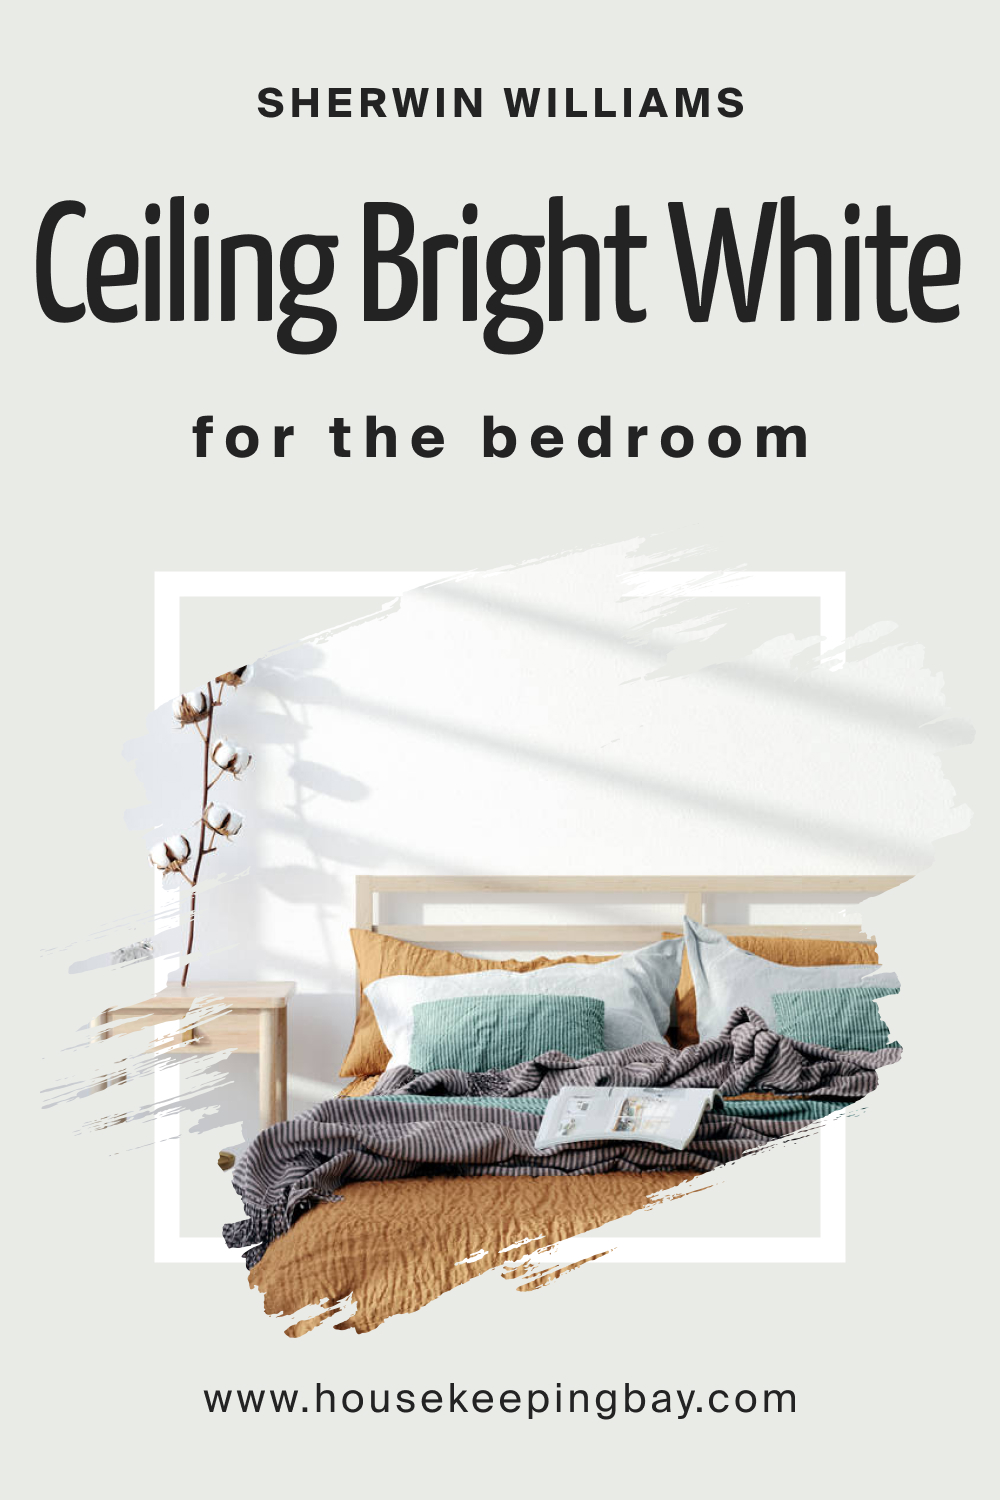 Sherwin Williams. SW Ceiling Bright White For the bedroom